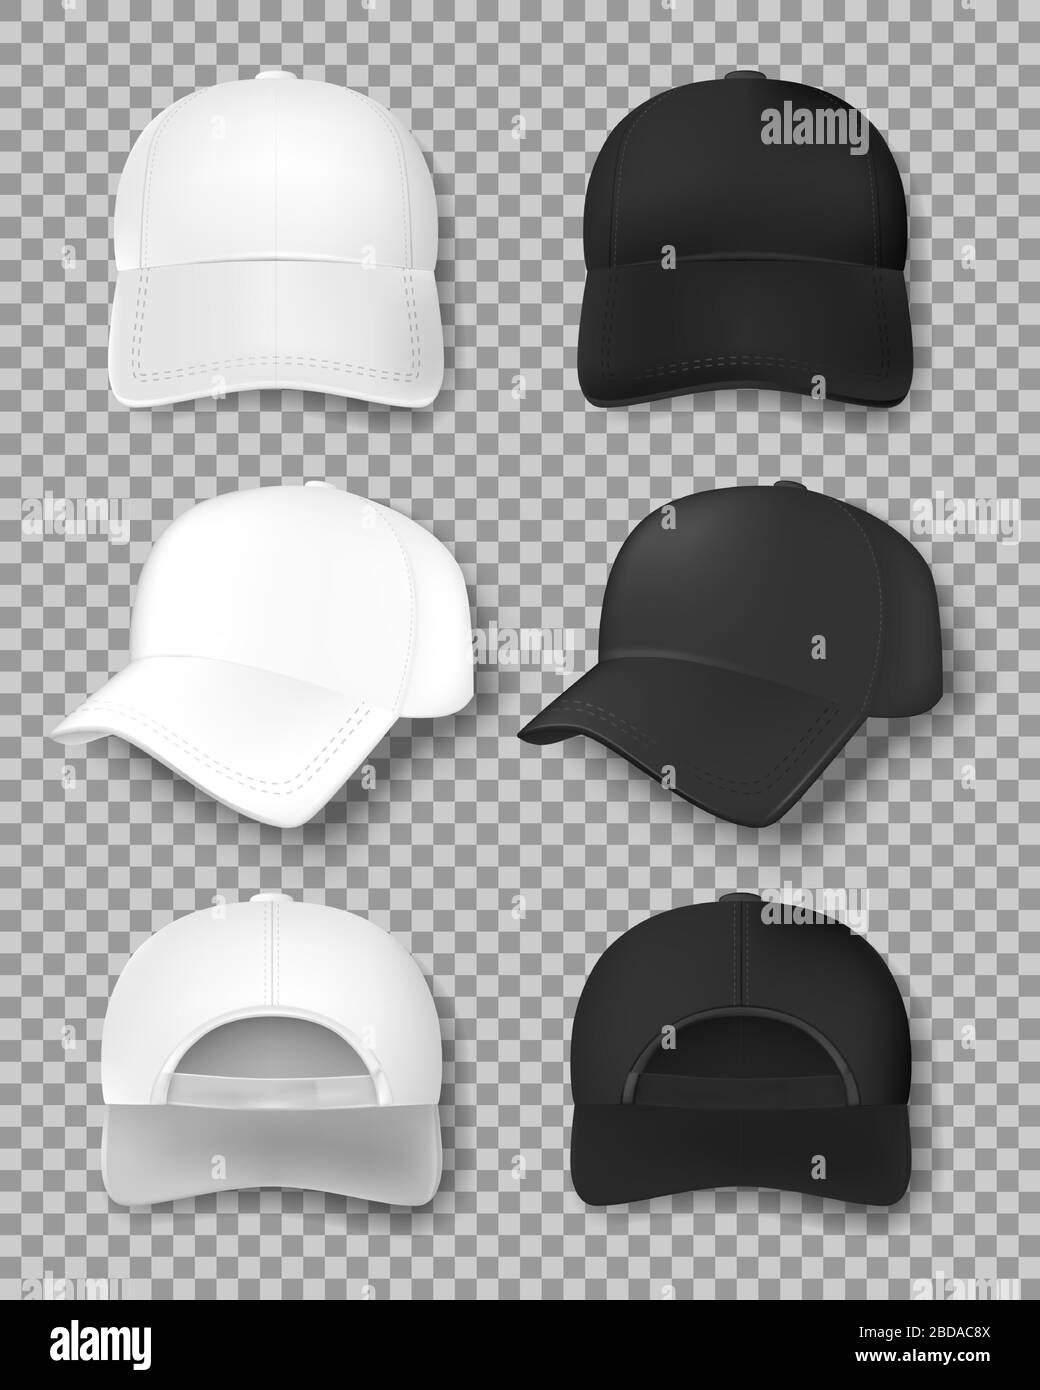 Download Realistic Baseball Cap Mockup Isolated On Transparent Background White And Black Textile Cap Front Back And Side View Uniform Hat Template Vector Stock Vector Image Art Alamy PSD Mockup Templates